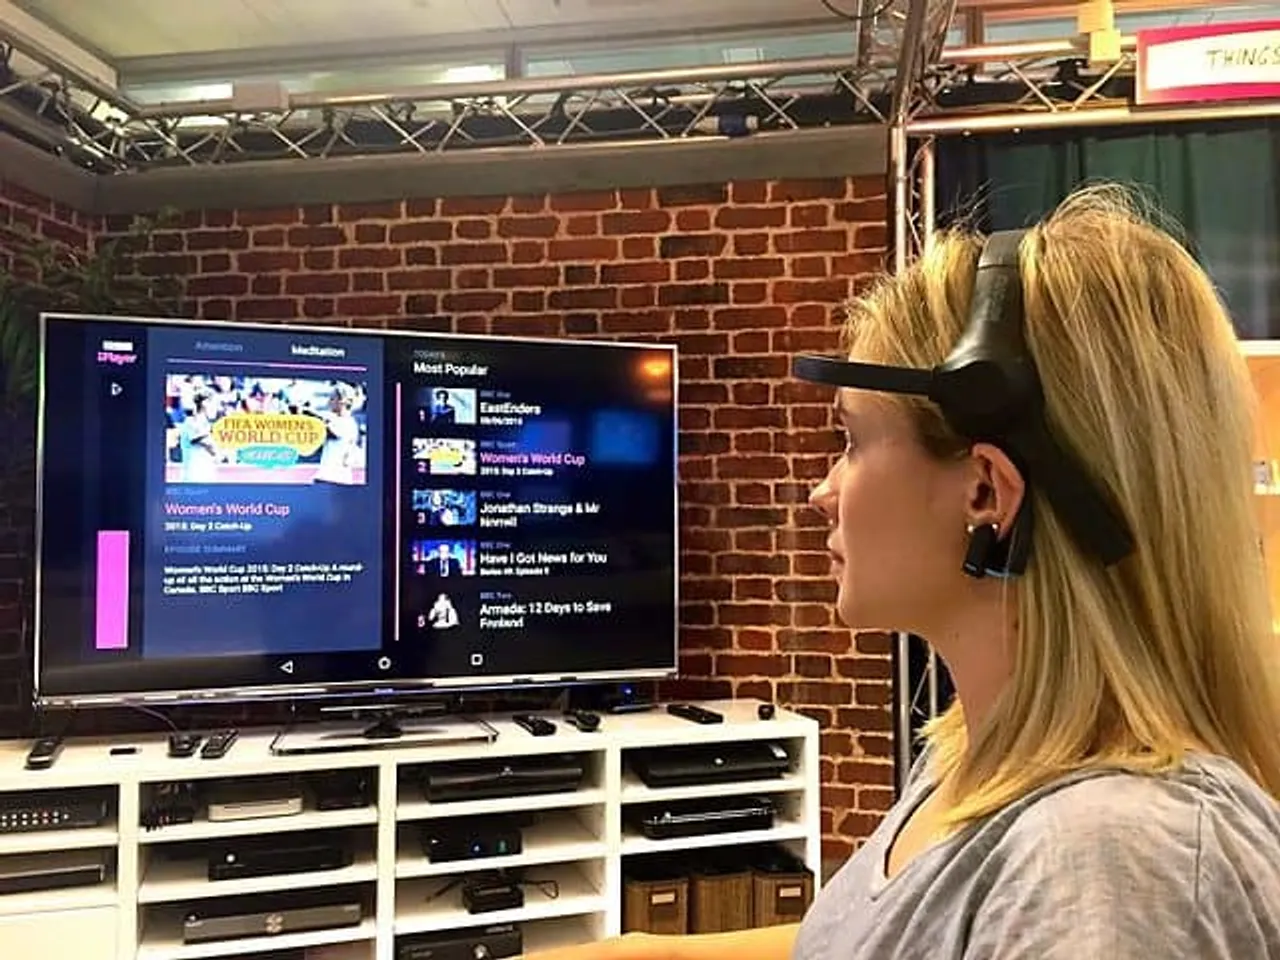 Now, you can control your TV with your mind